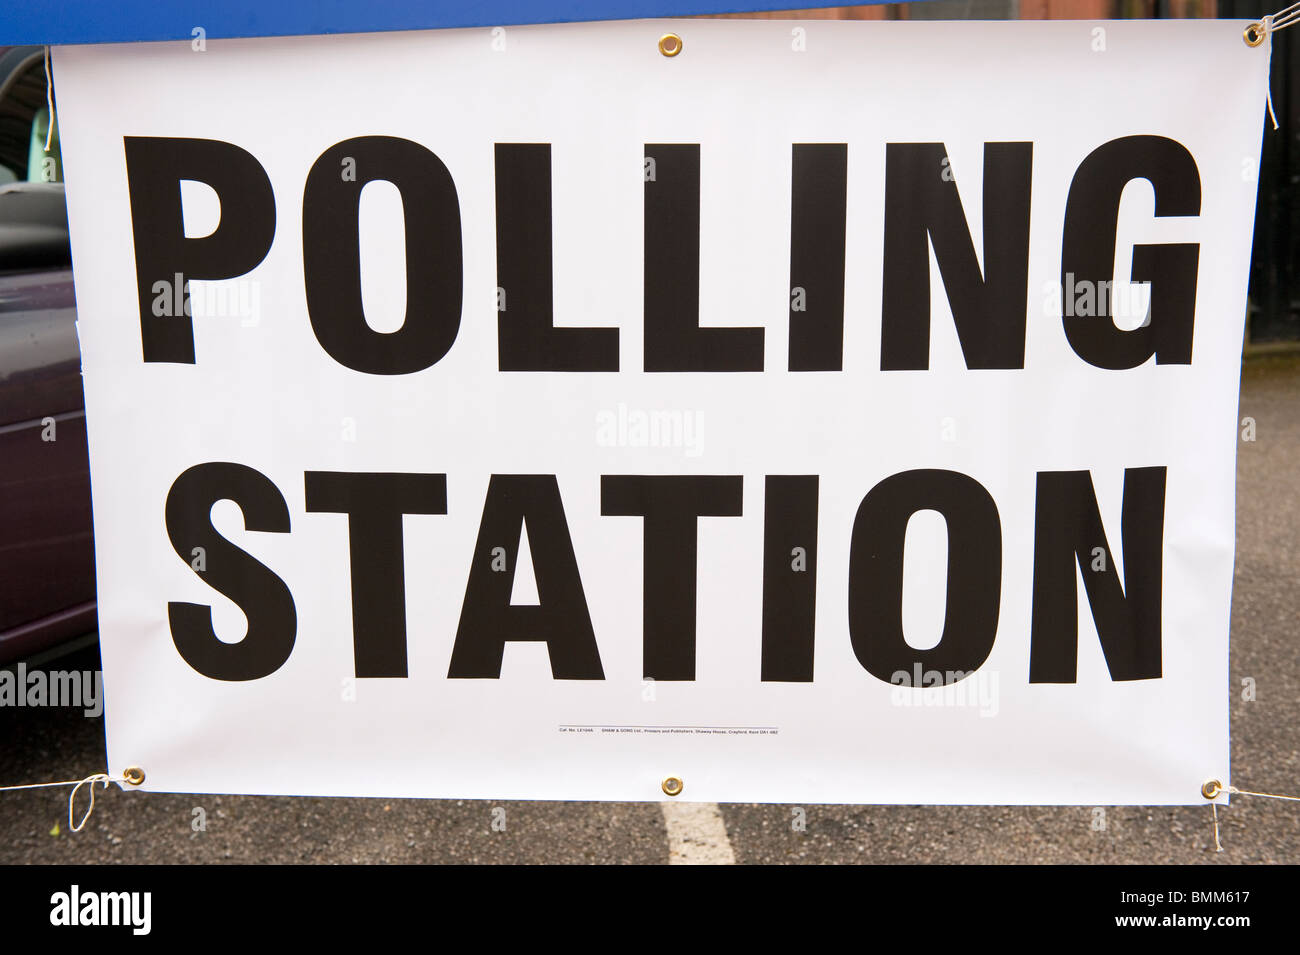 Polling station sign Stock Photo